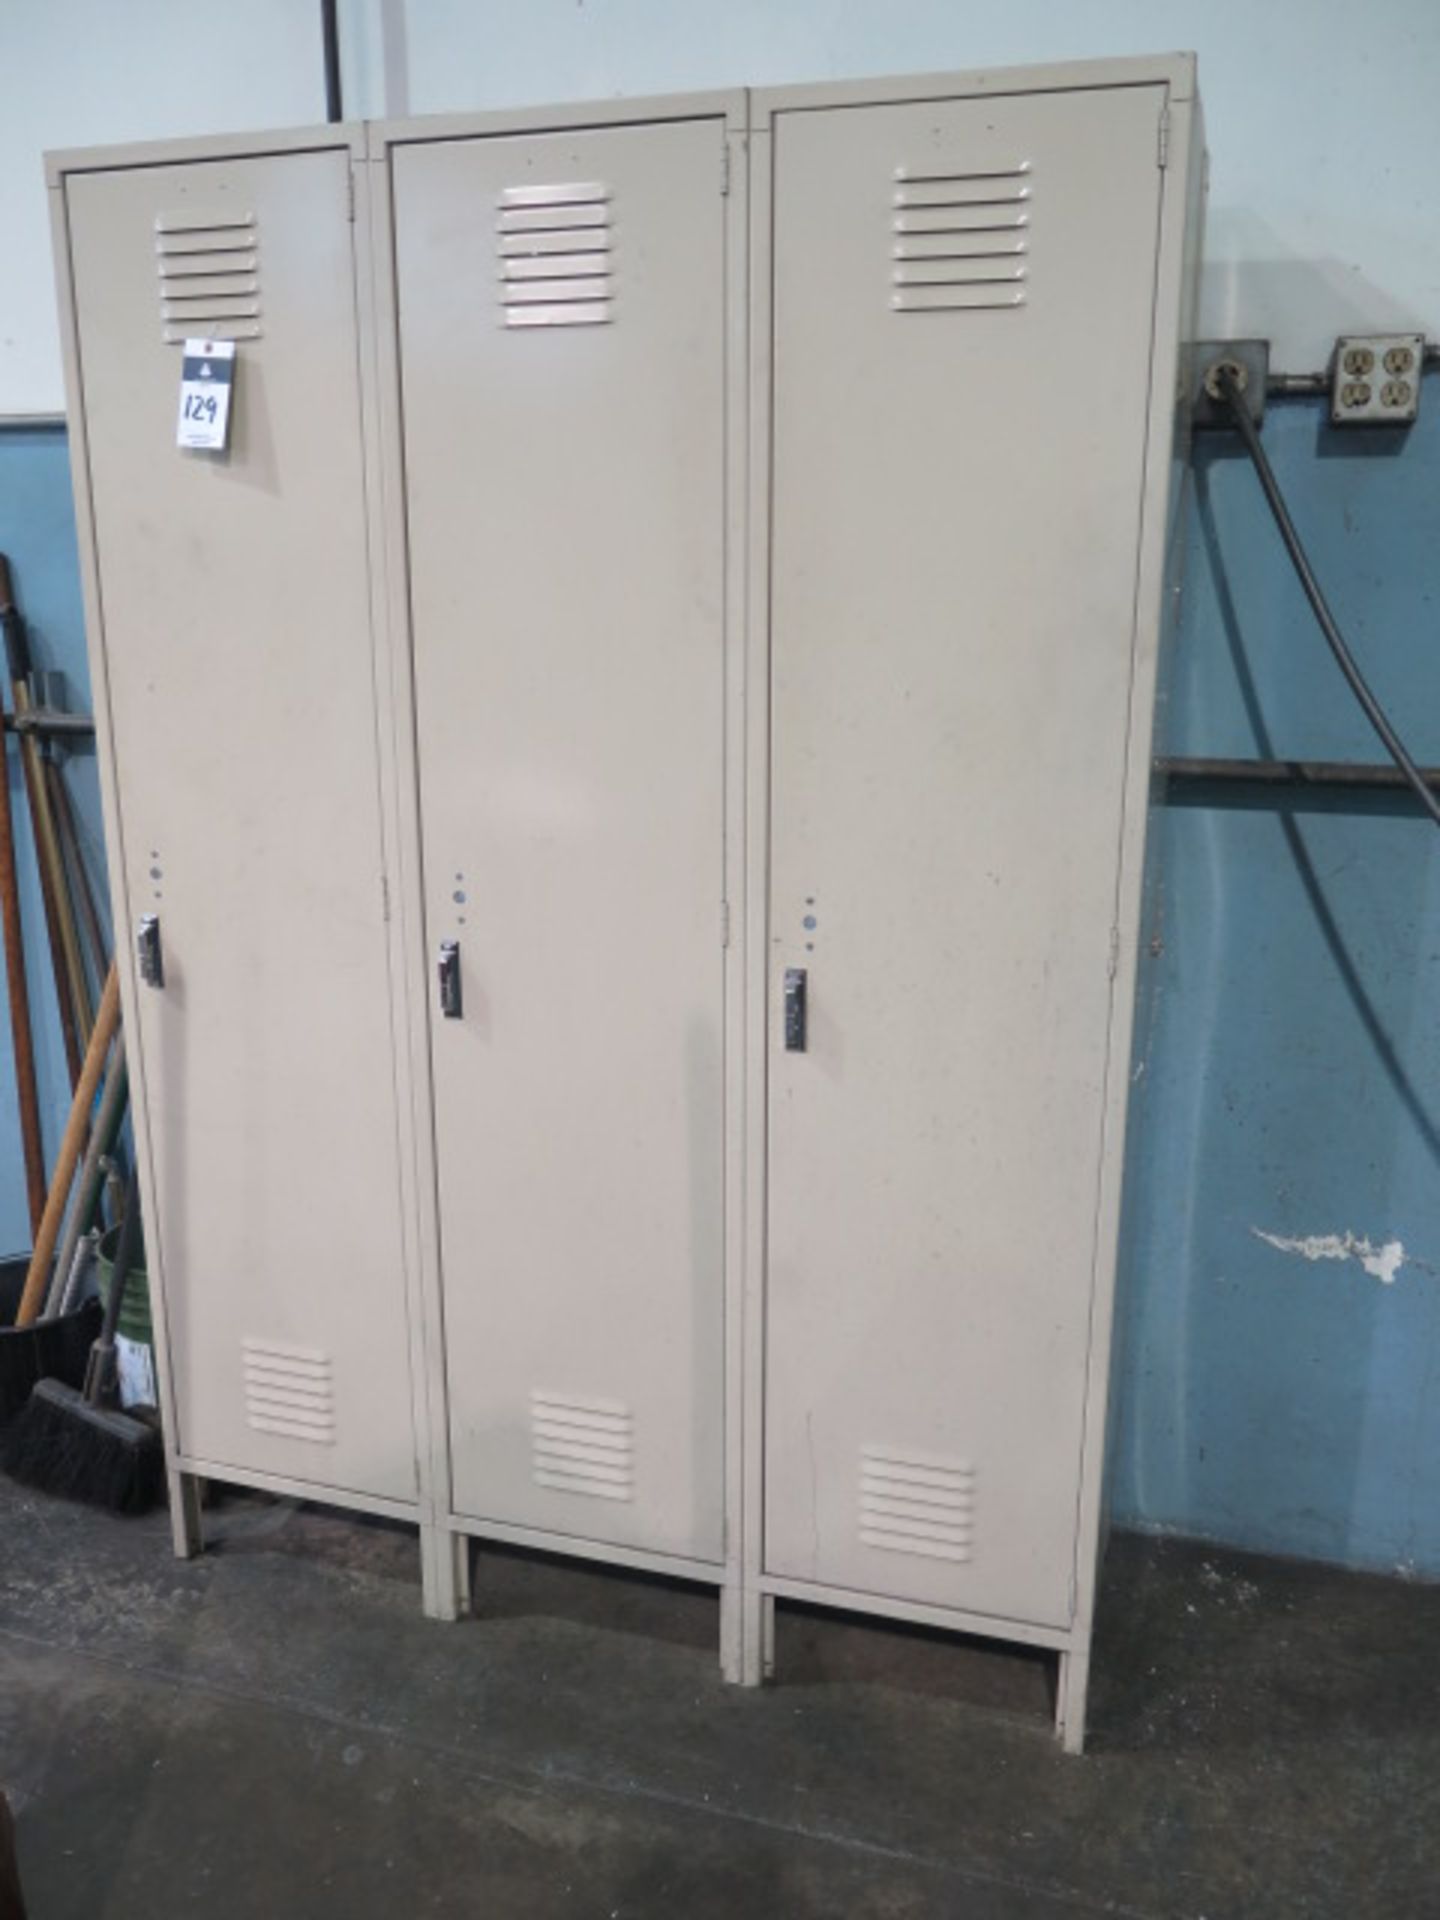 Employee Lockers And Cleaning Supplies